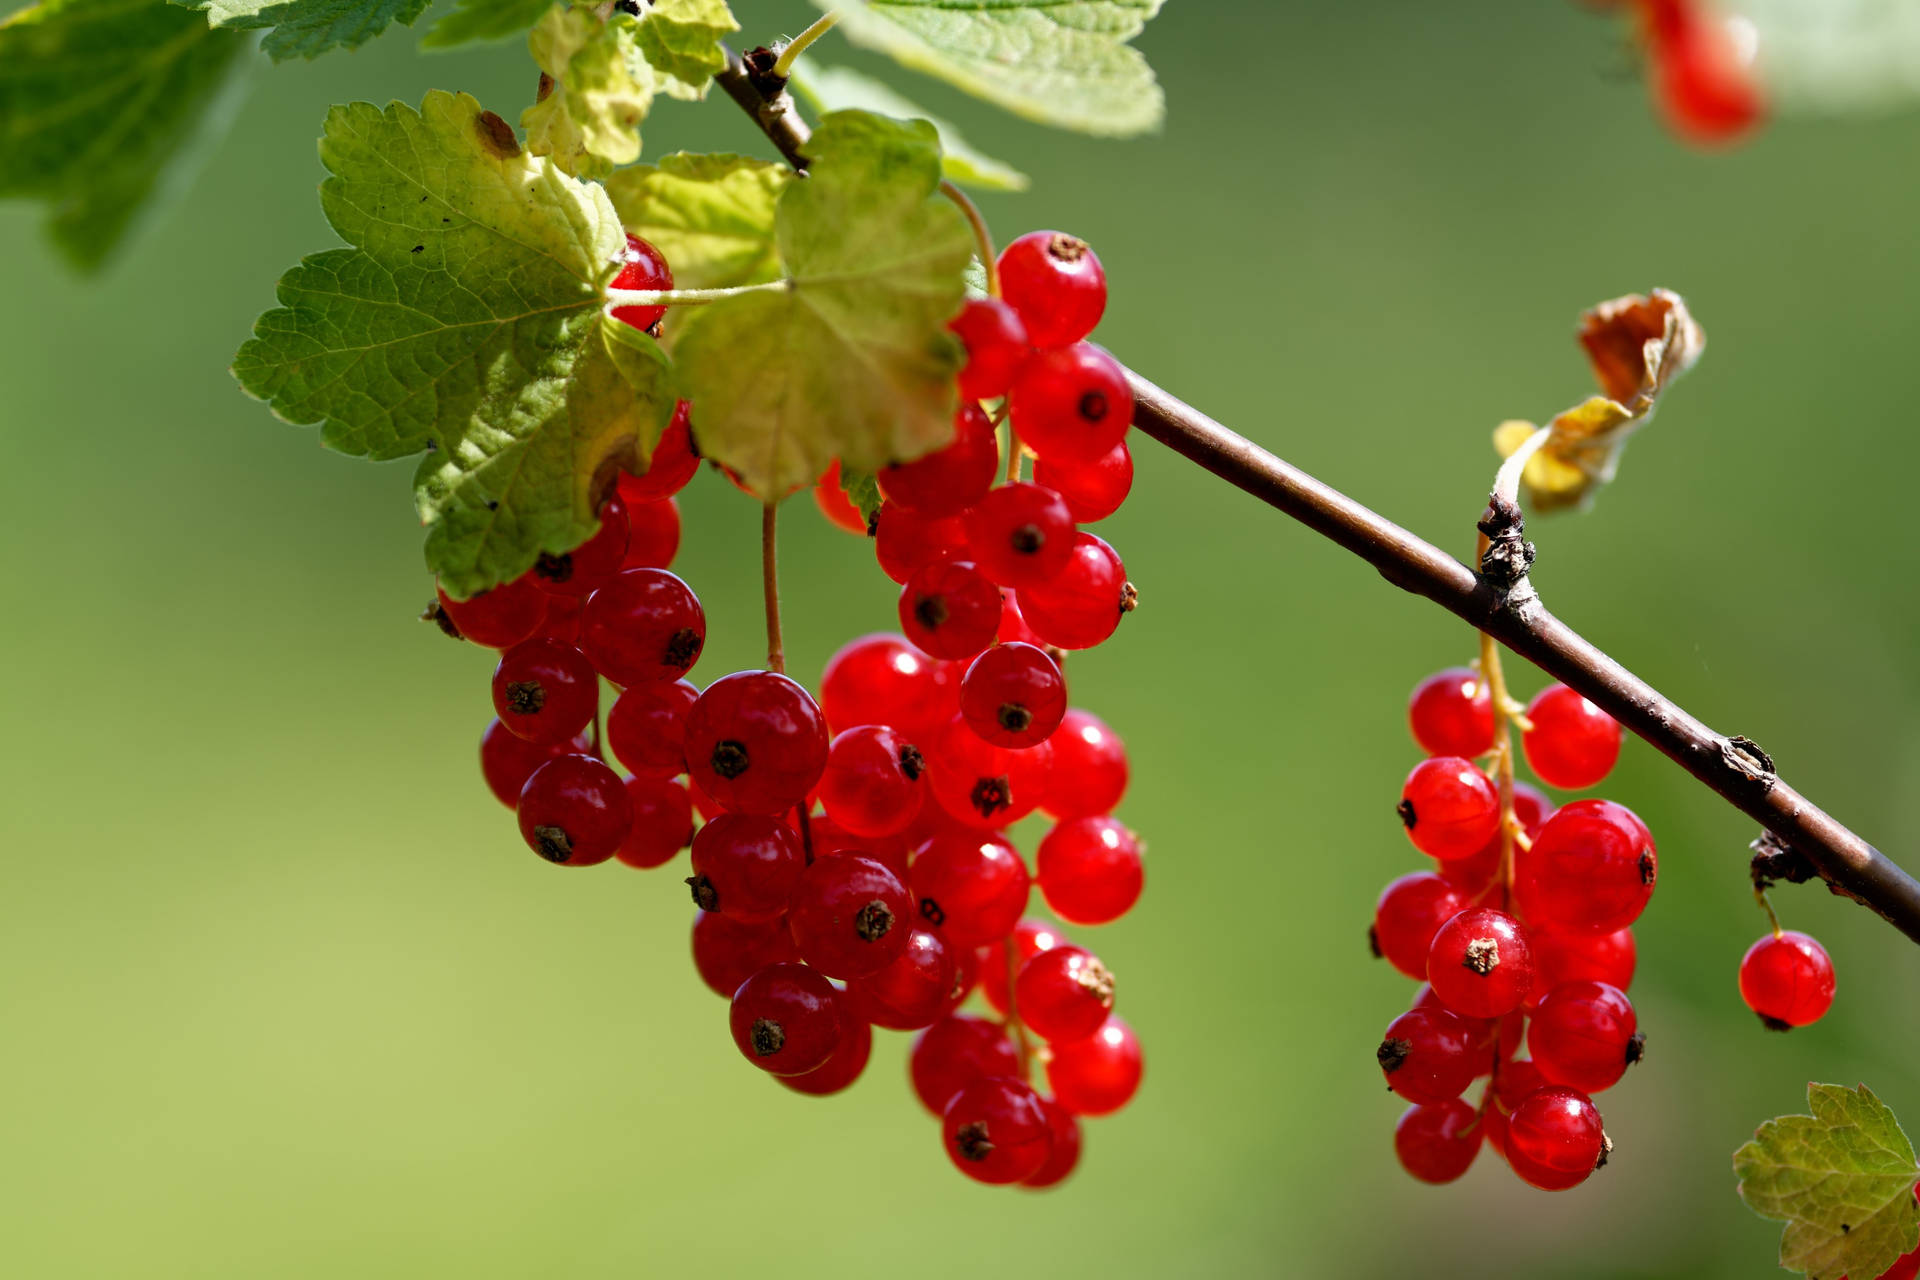 Rotejohannisbeere - Ribes-pflanze Wallpaper